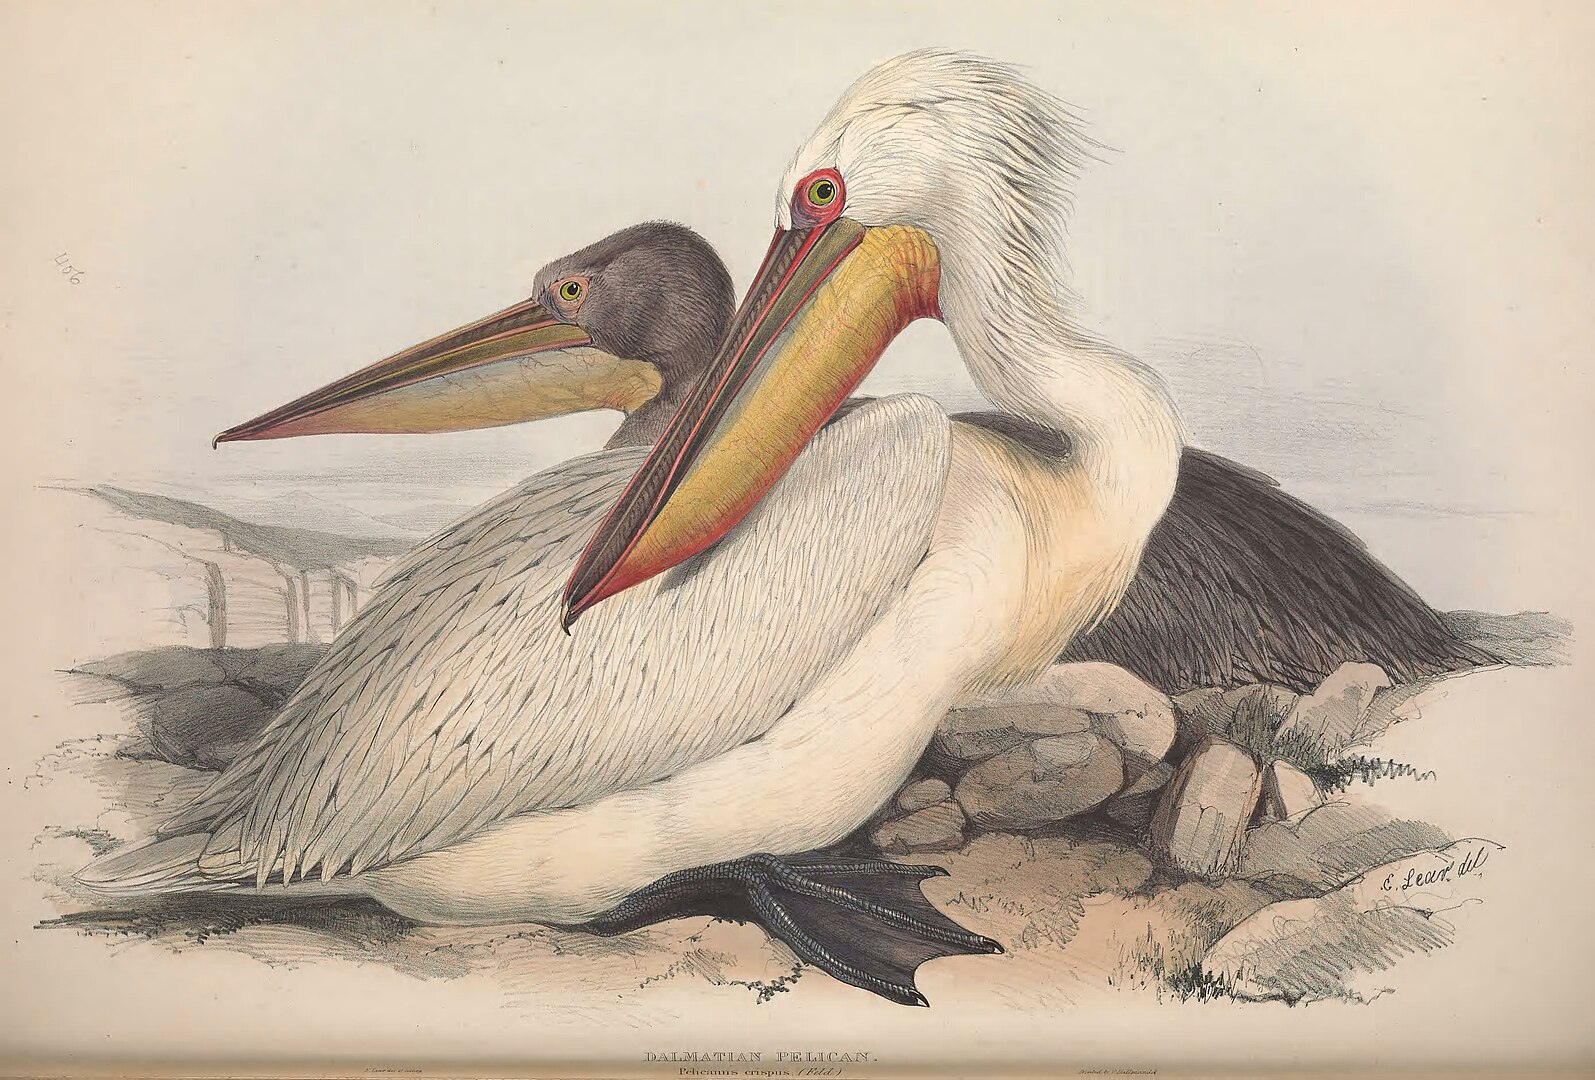 An illustration of two pelicans